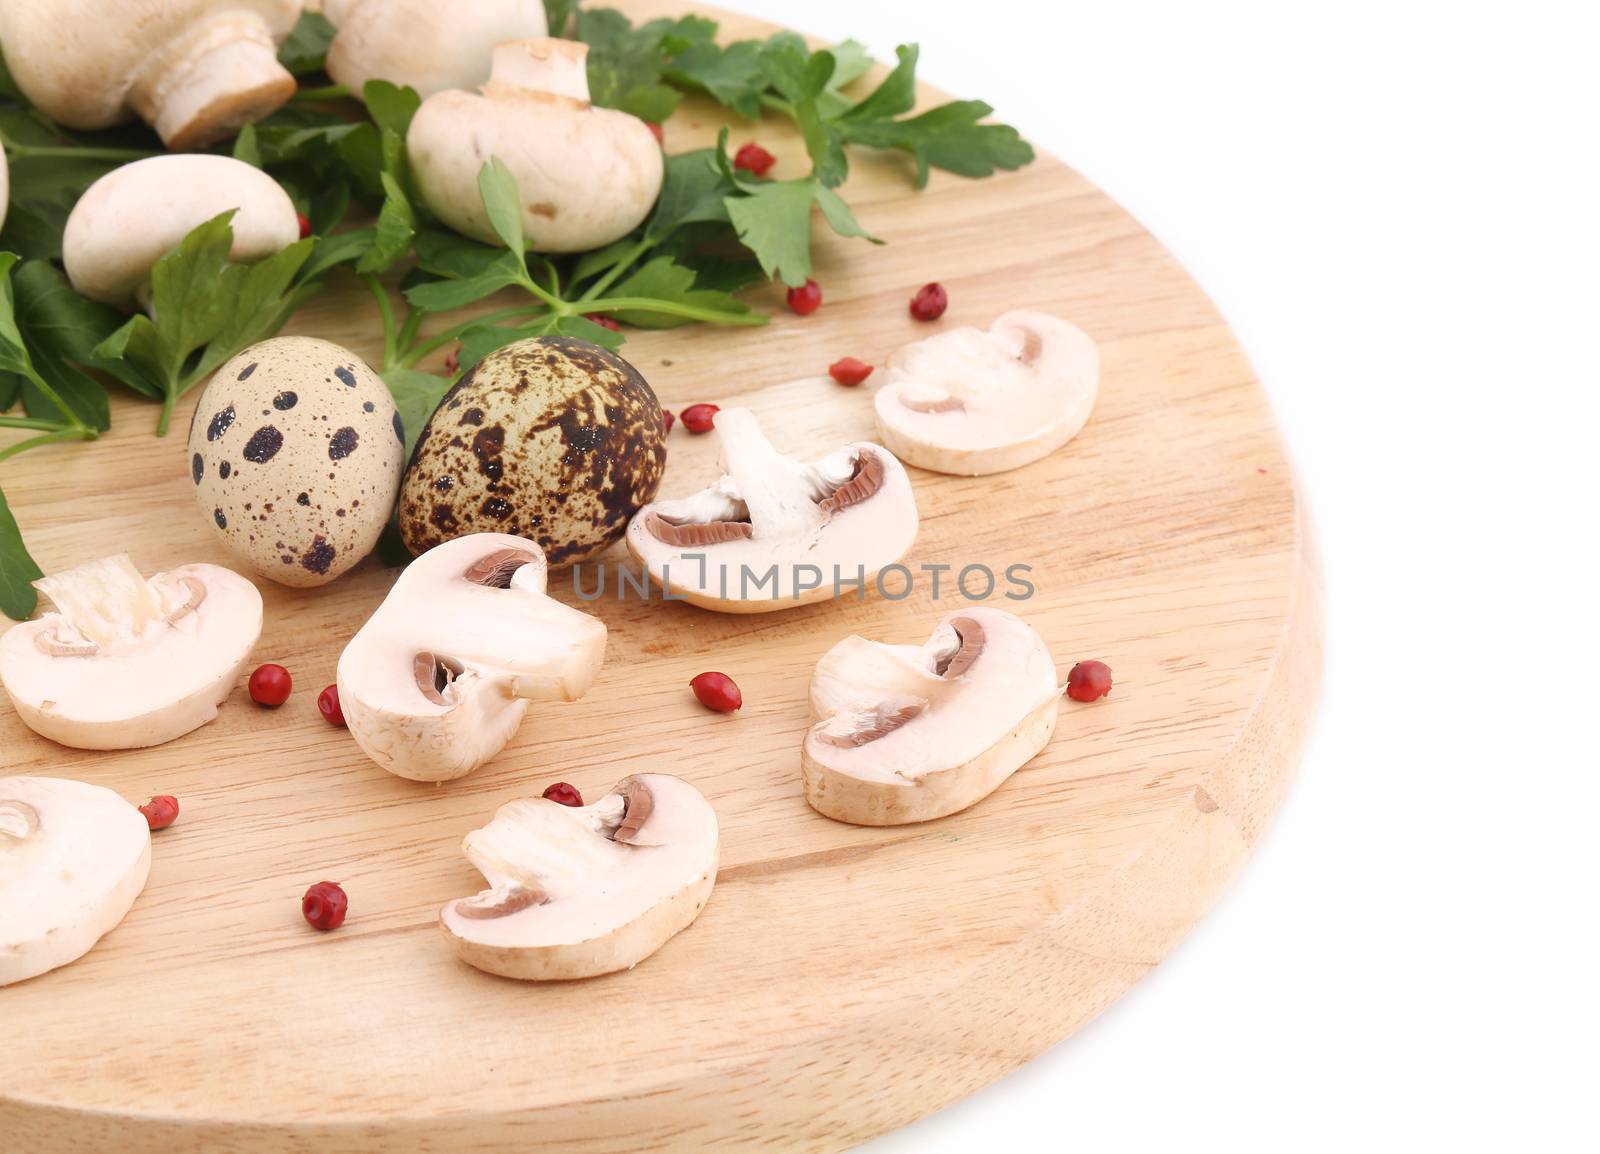 Mushrooms champignon and quail eggs on platter. Isolated on a white background.